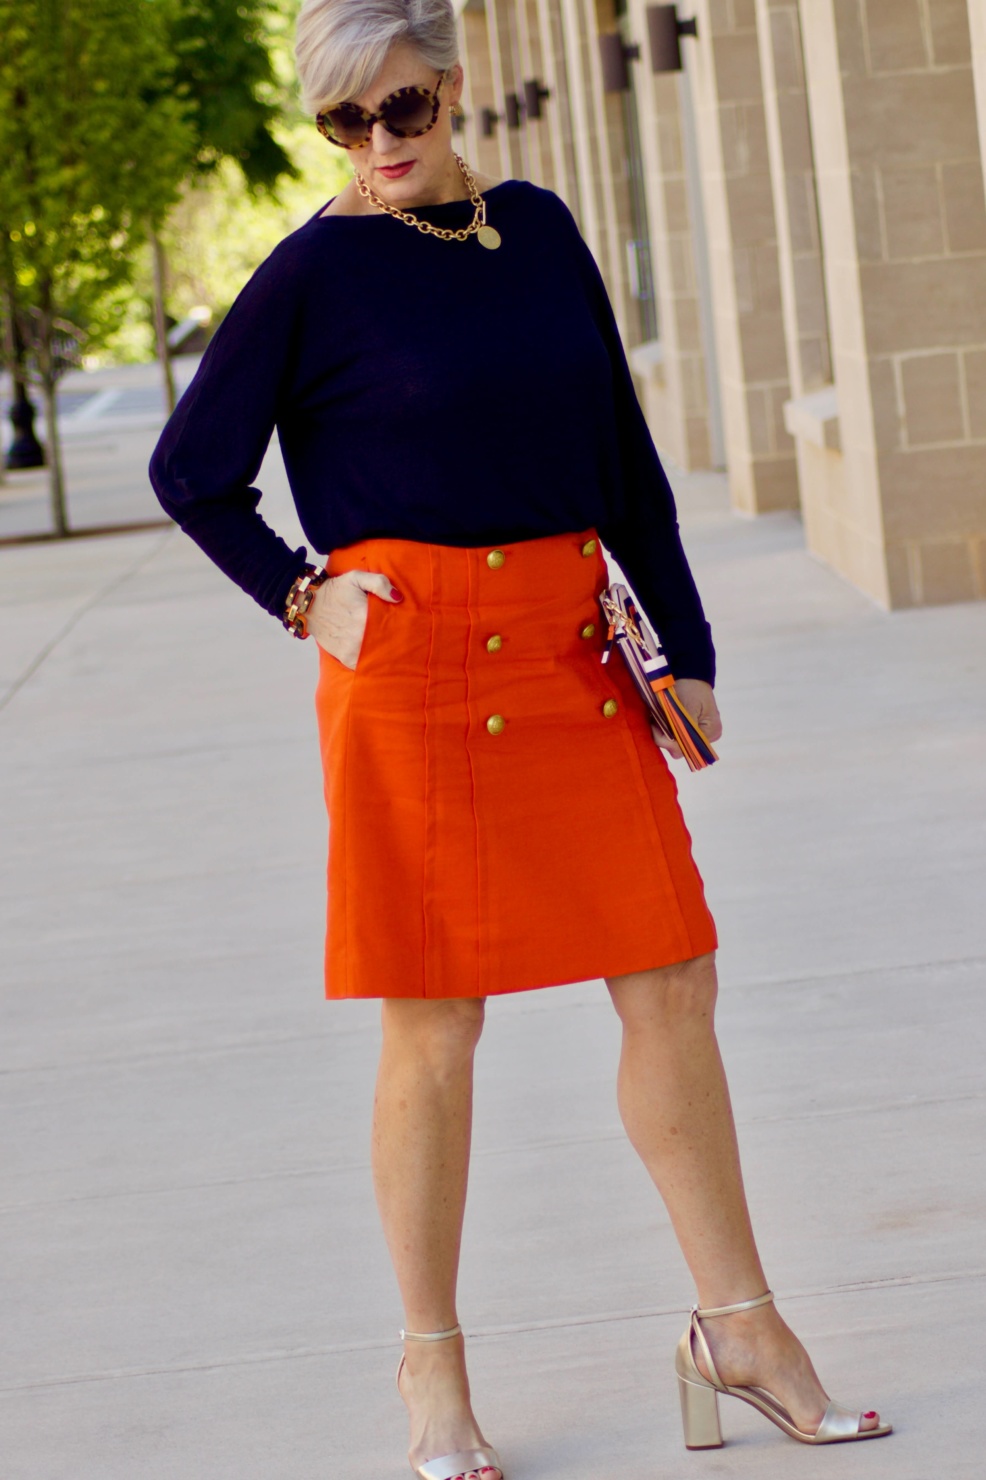 beth from Style at a Certain Age wears a J.Crew orange skirt, blue tee, gold sandals, and Tory Burch mini bag.